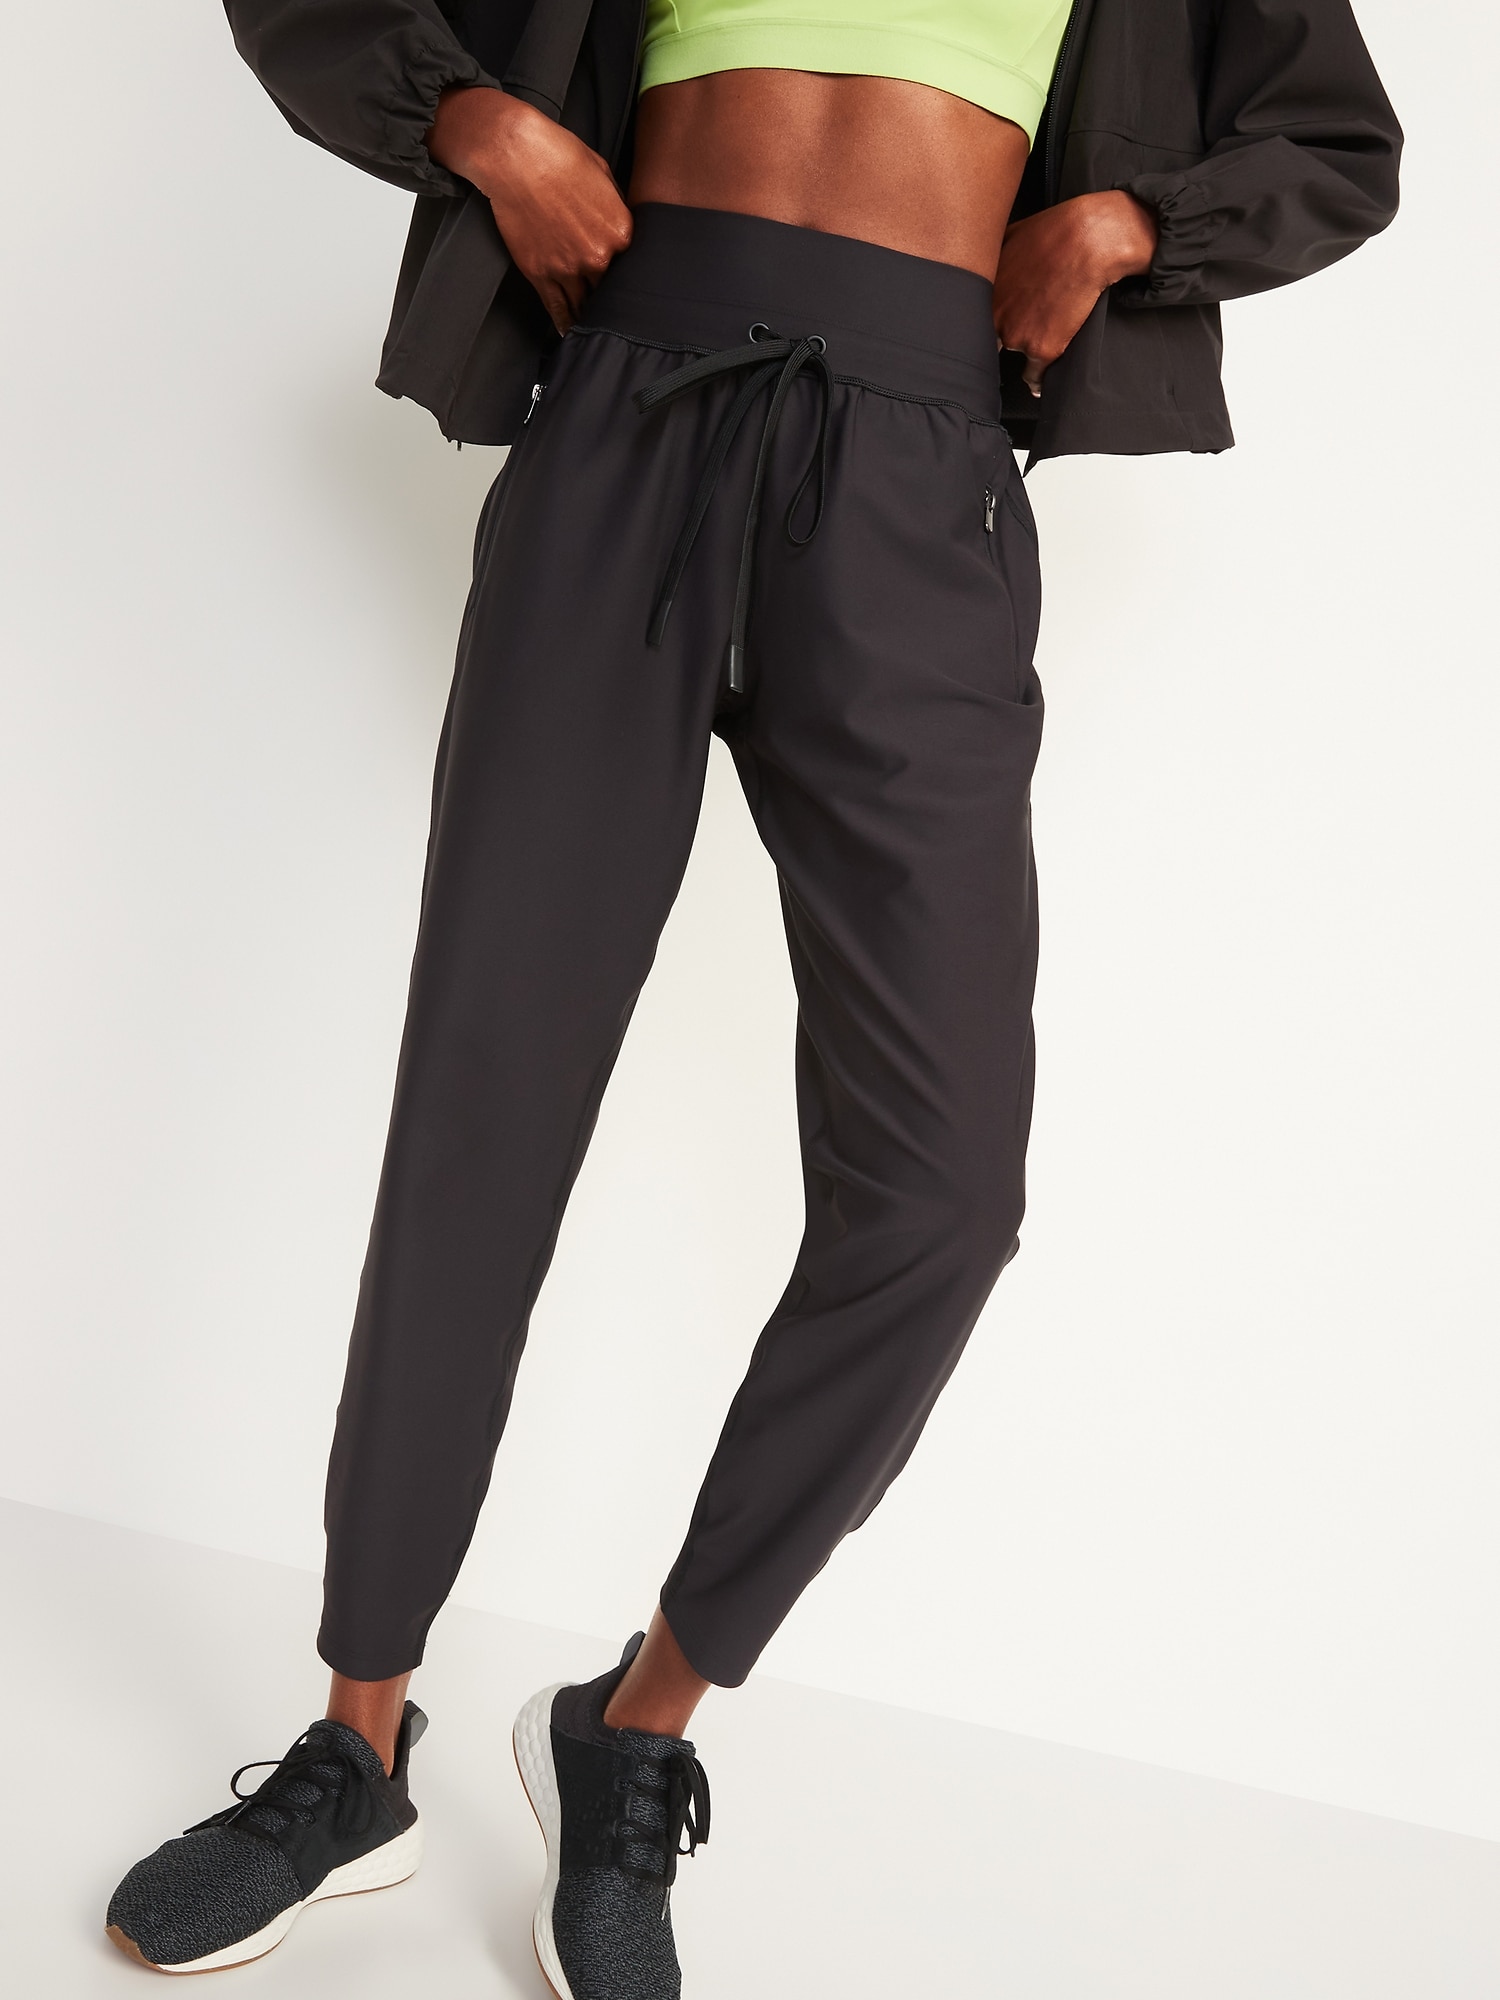 Old Navy PowerSoft Jogger Pants